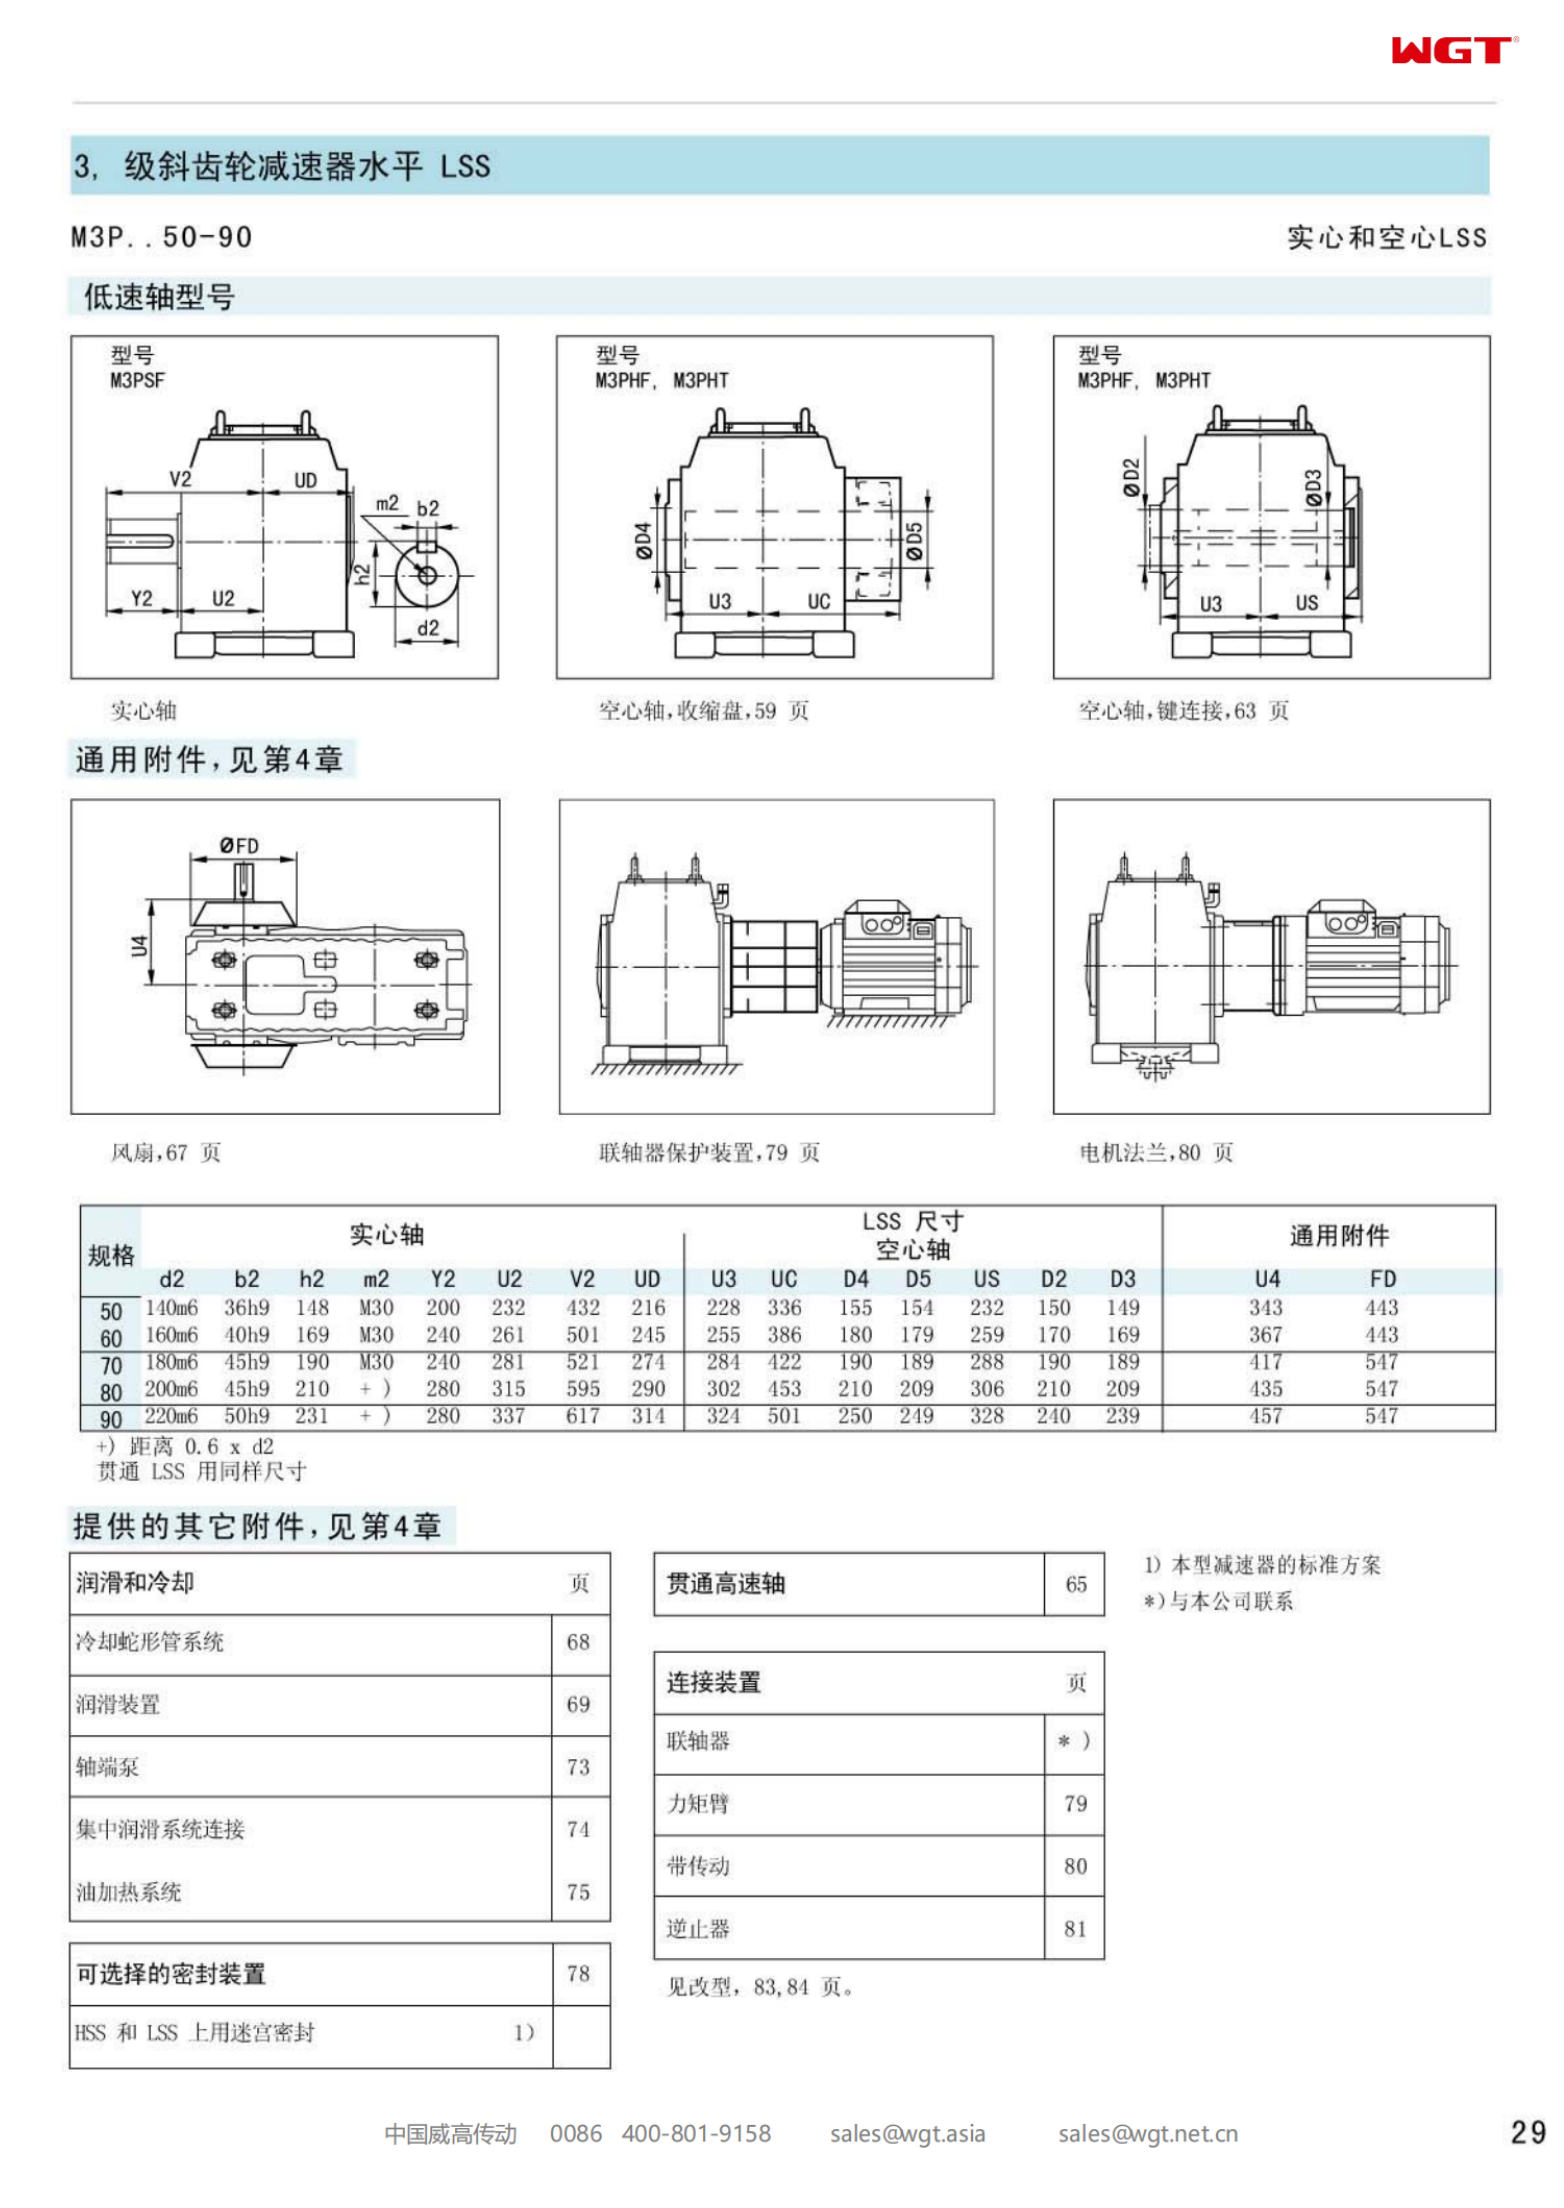 M3PHT50 Replace_SEW_M_Series Gearbox